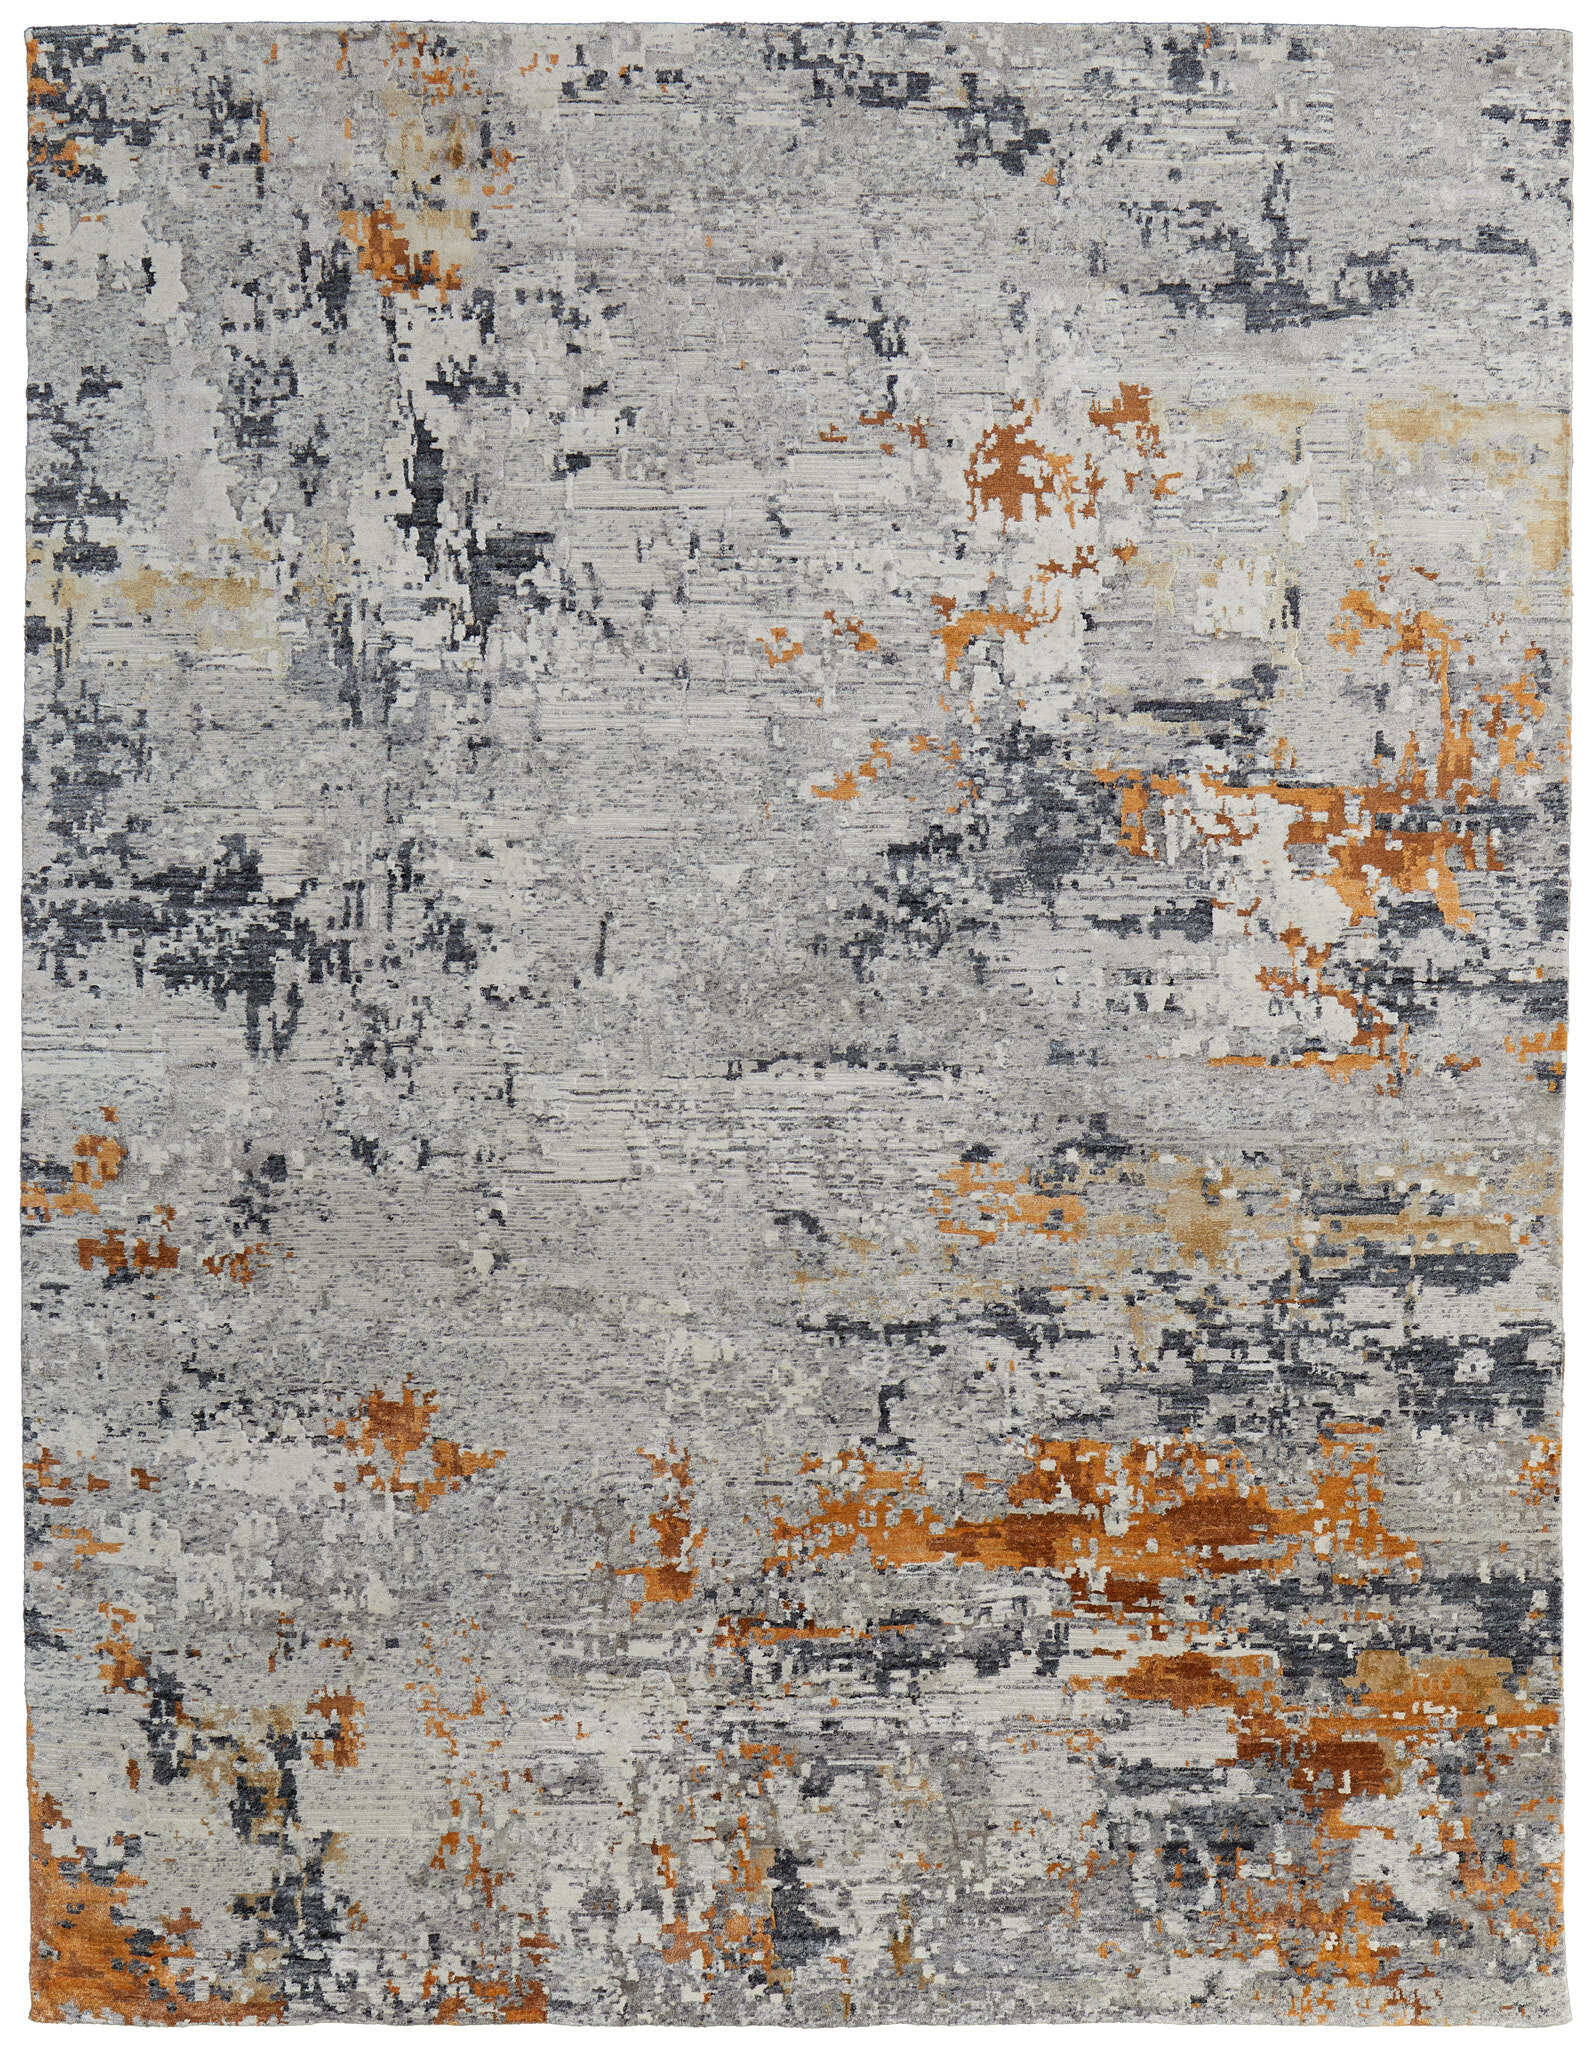 Fine Rugs - New Arrivals | Feizy